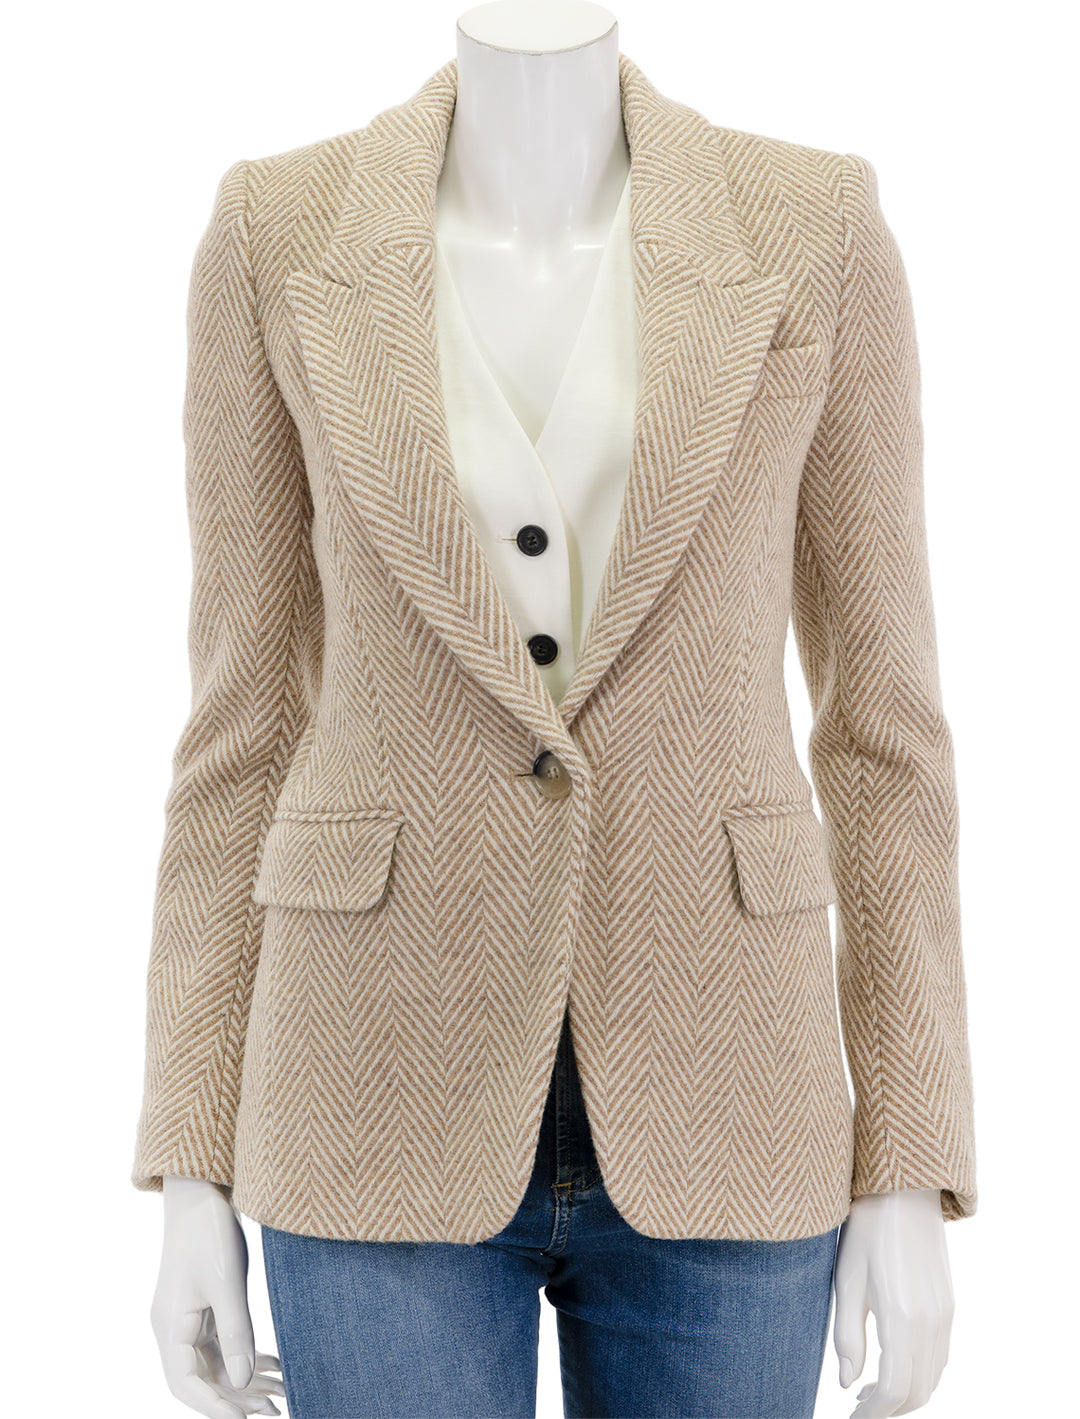 Front view of Isabel Marant Etoile's kerstin blazer in toffee, buttoned.